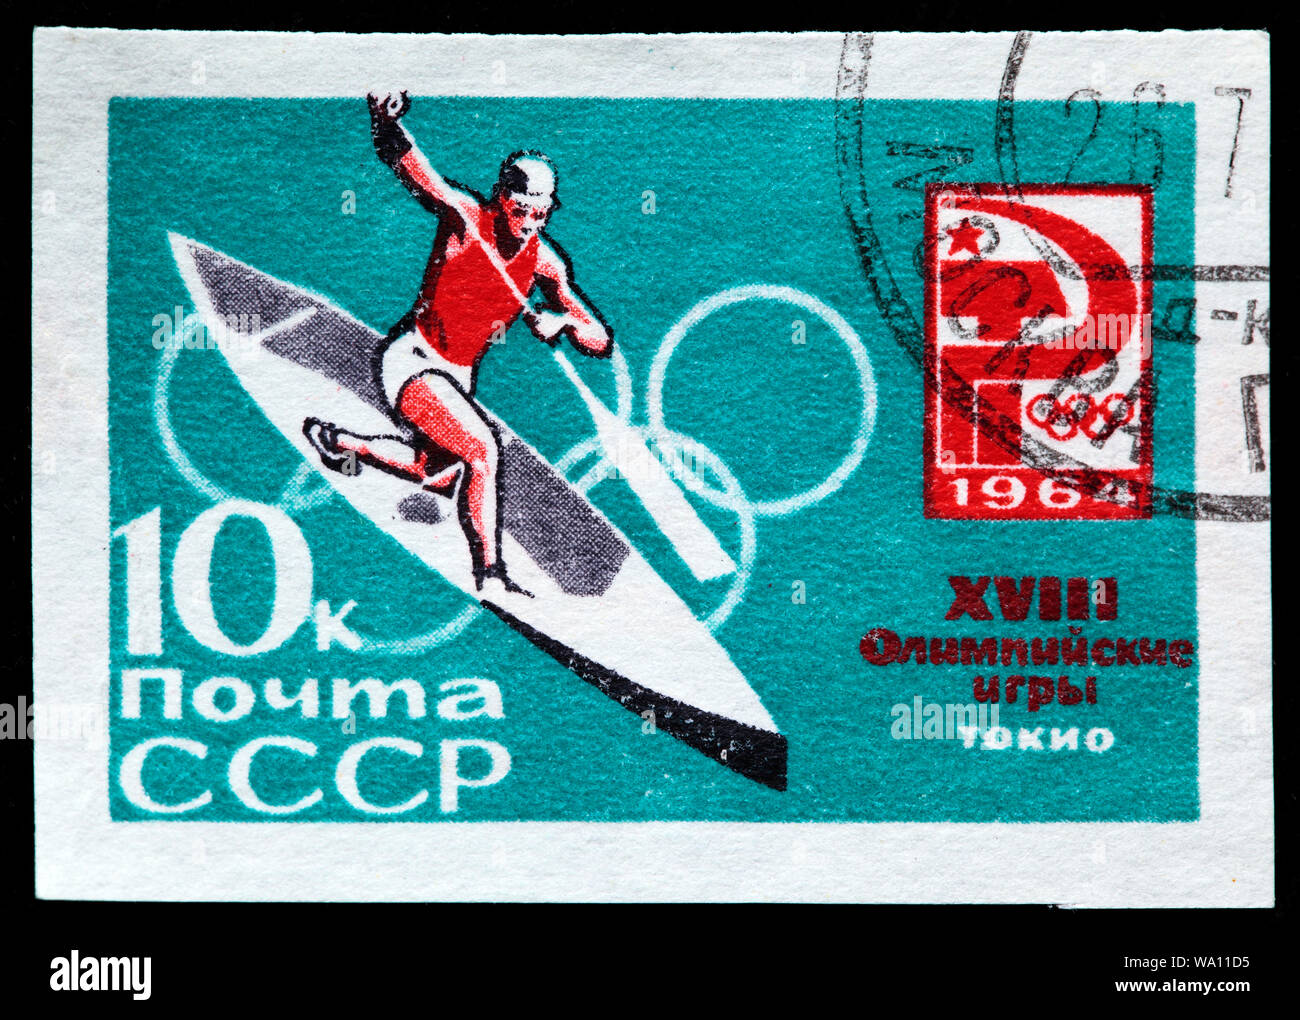 Canoeing, Summer Olympics 1964, Tokyo, postage stamp, Russia, USSR, 1964 Stock Photo